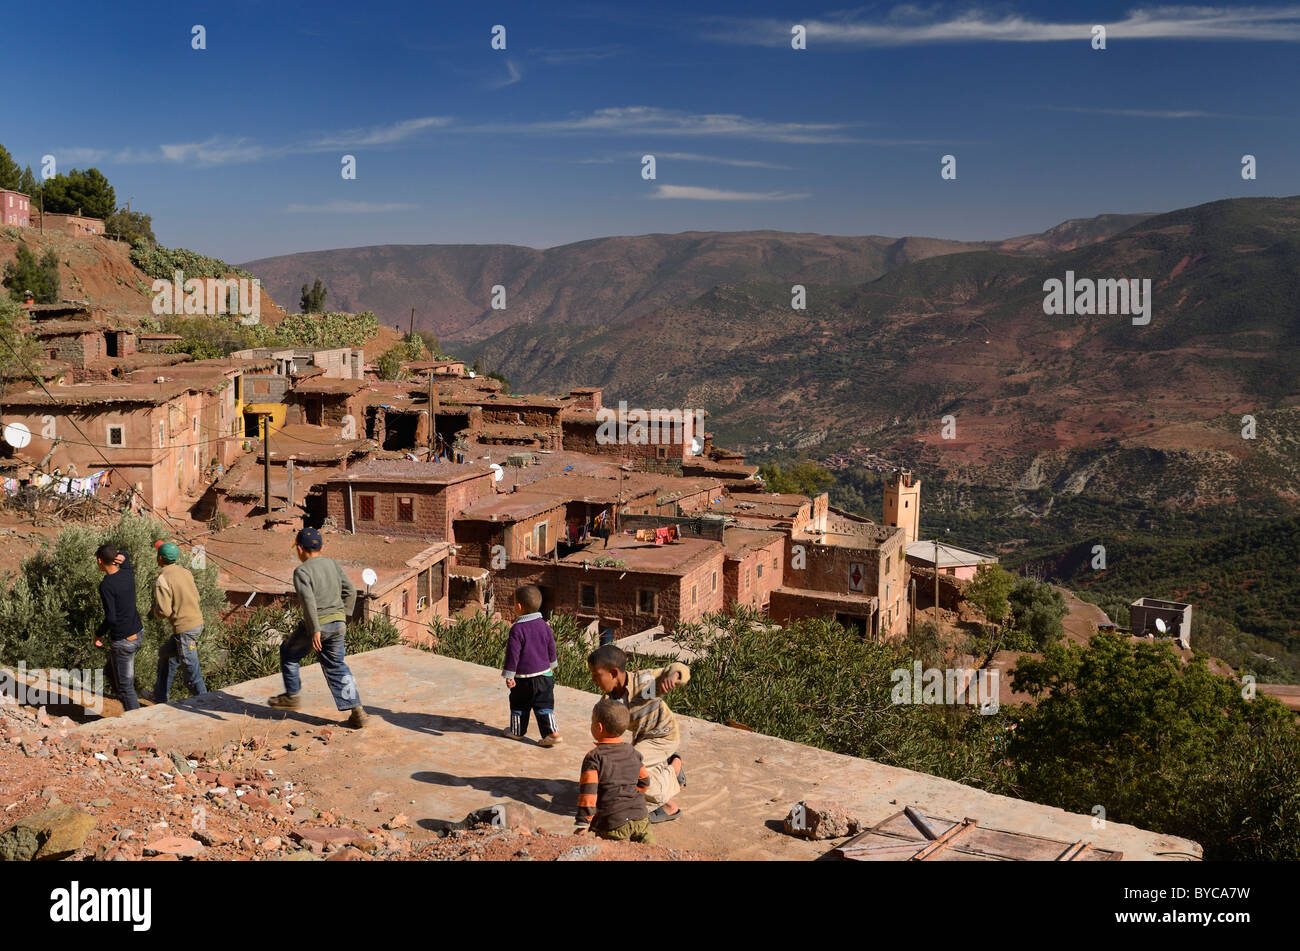 Children playing in a remote mountainside village near Ait Mannsour in the High Atlas mountains of Morocco Stock Photo